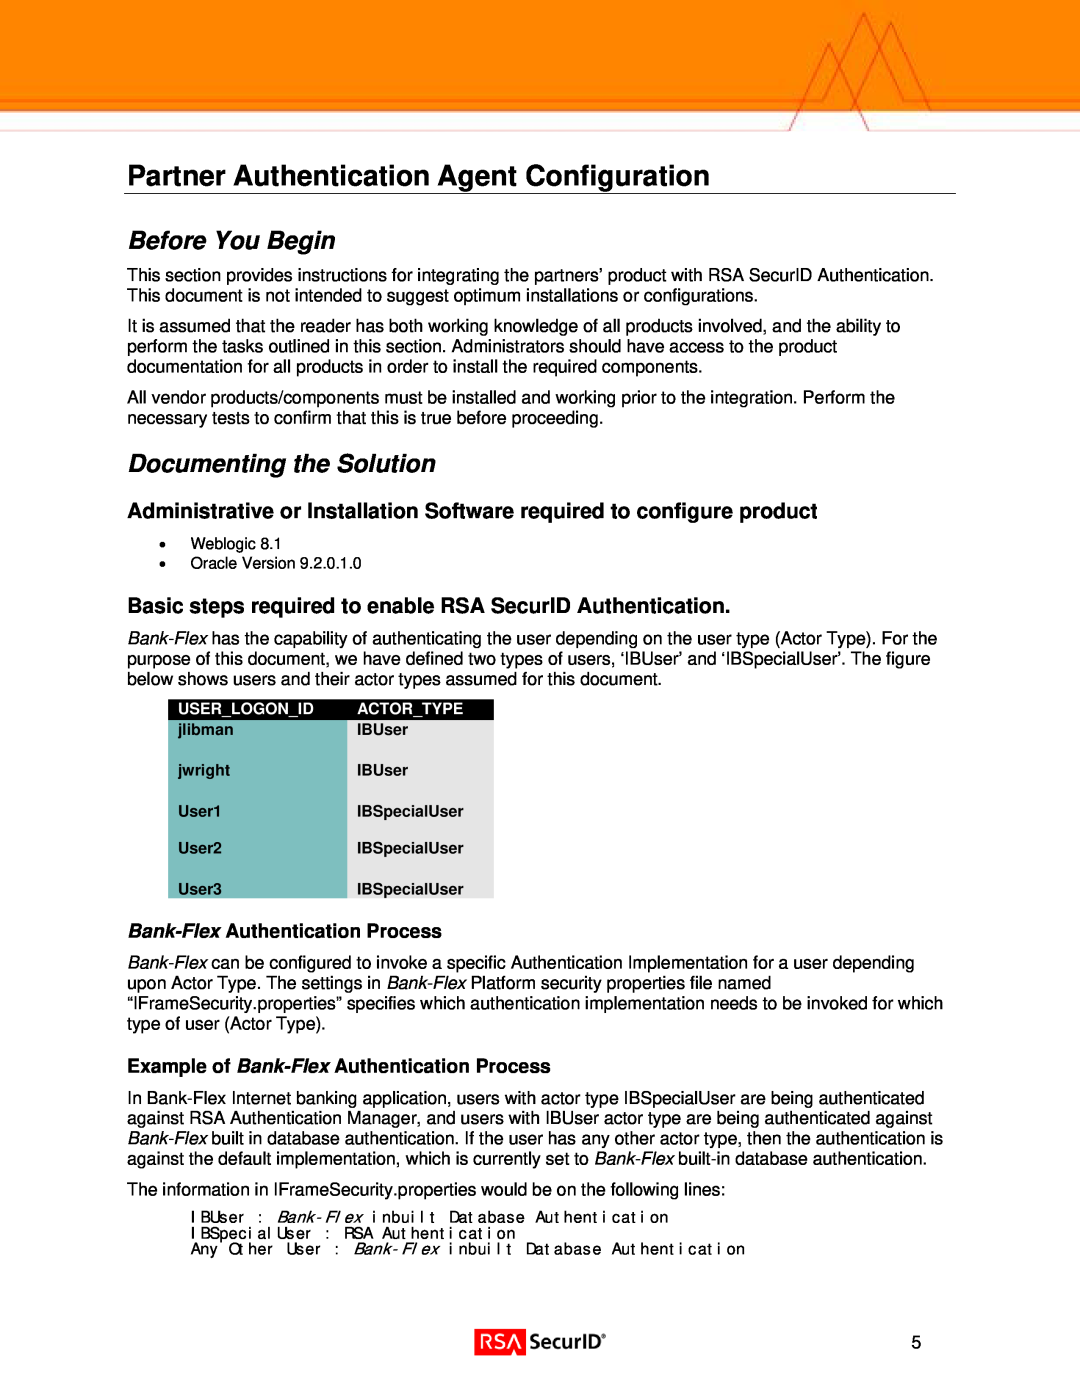 Eon Version 1.0 (J2EE) on Solaris 9 Partner Authentication Agent Configuration, Before You Begin, Documenting the Solution 